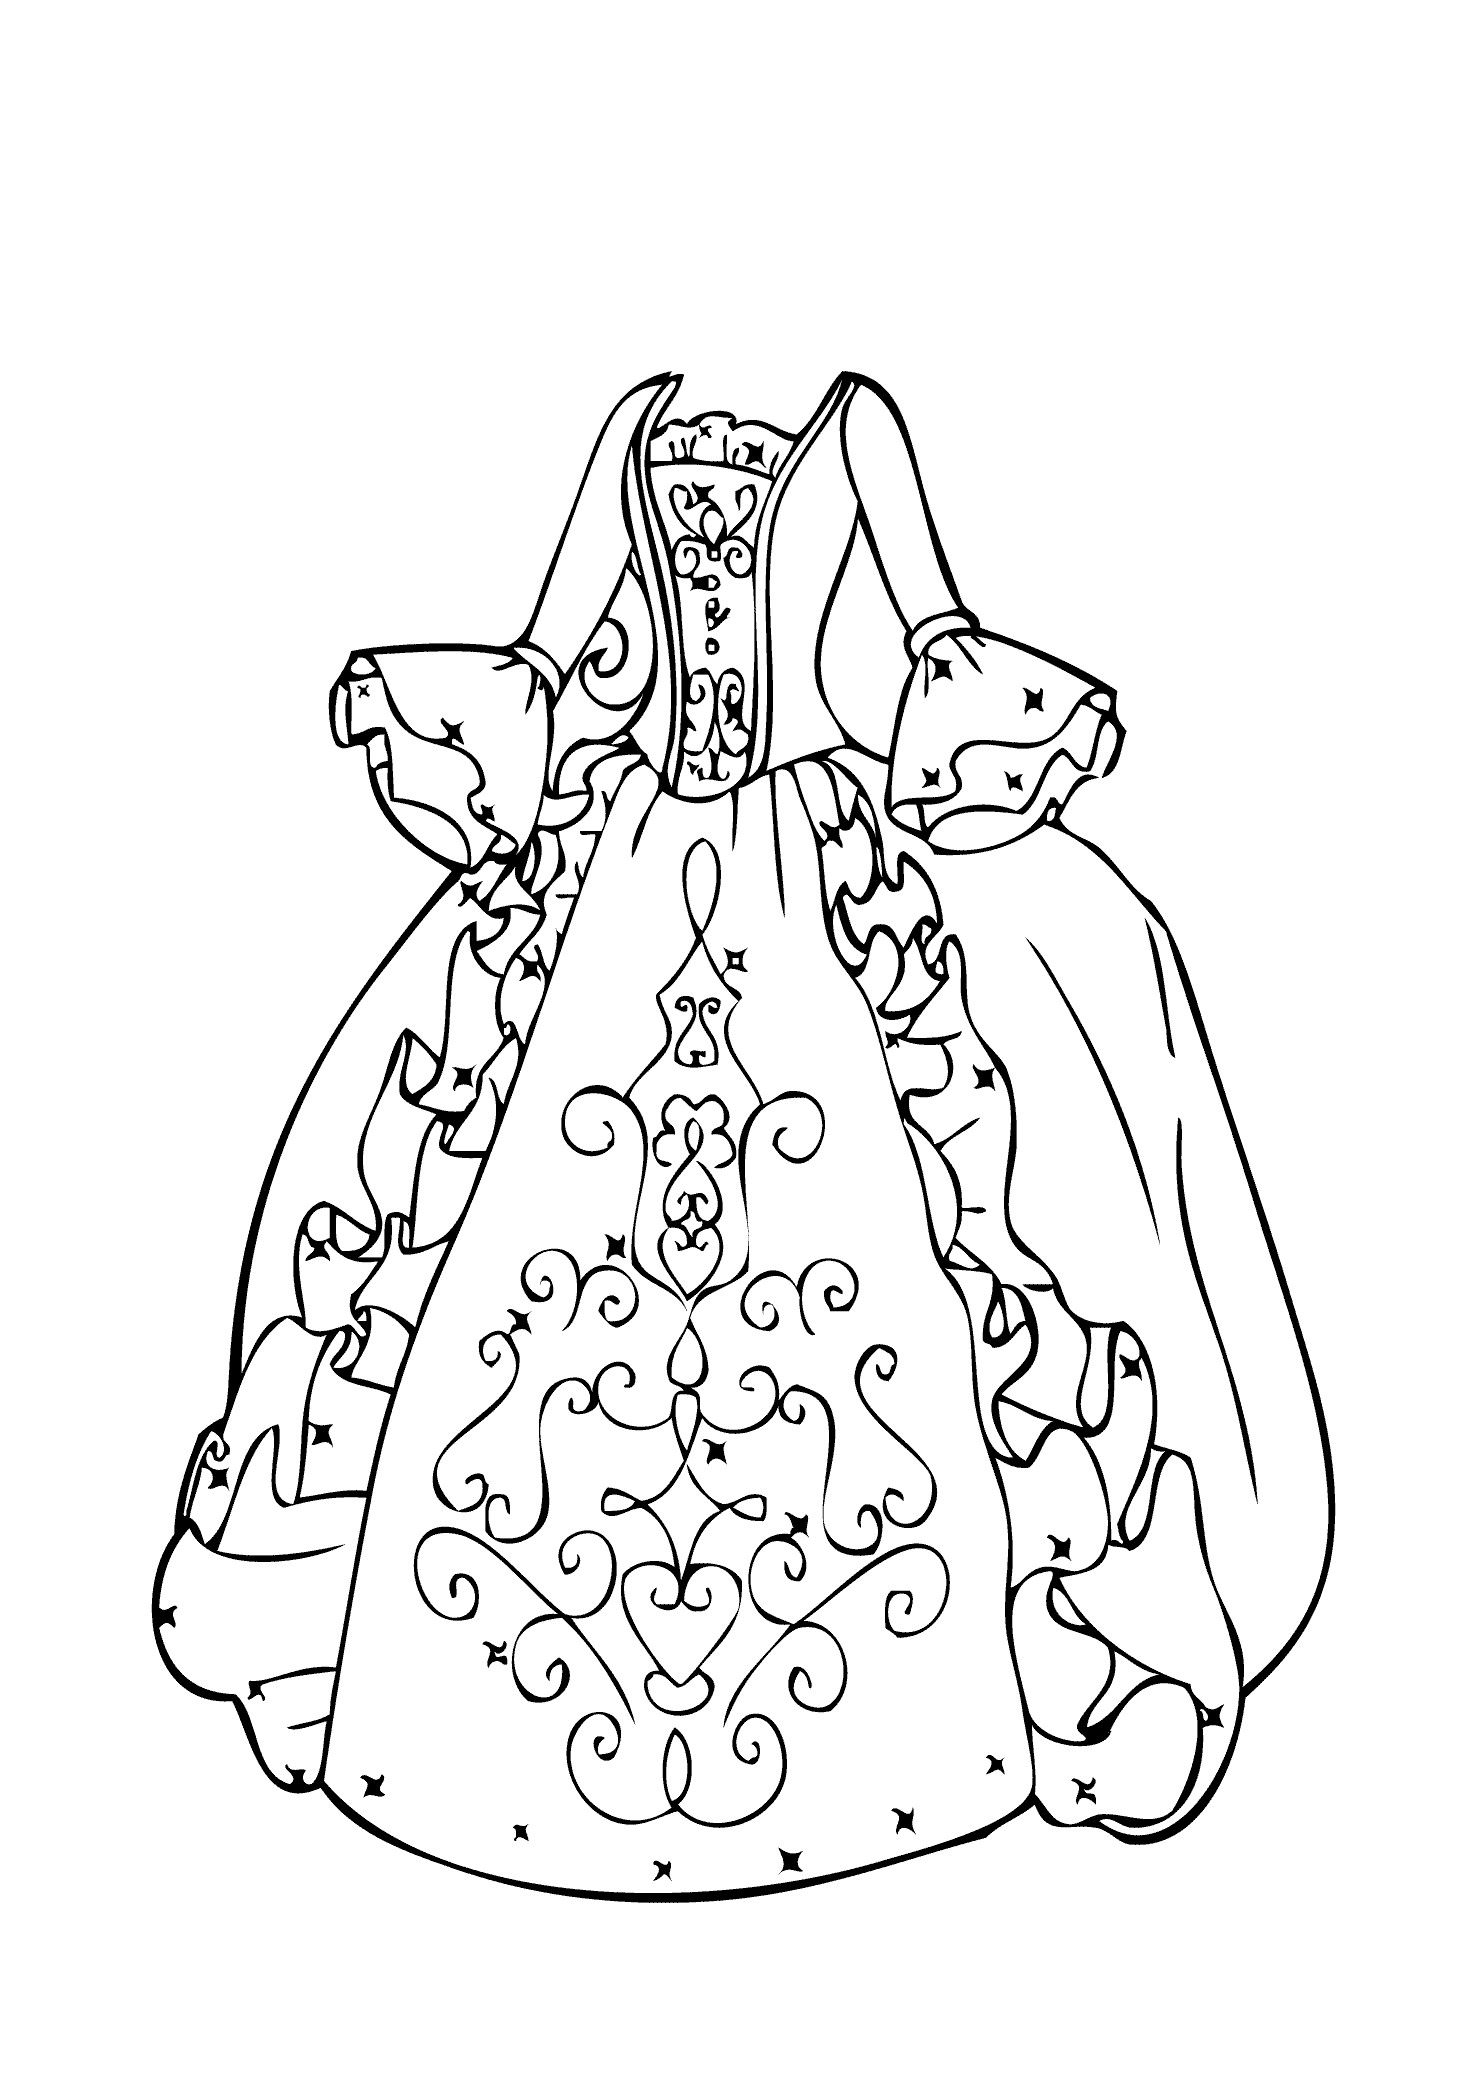 Girls Clothes Coloring Pages
 Ball gown coloring page for girls printable free